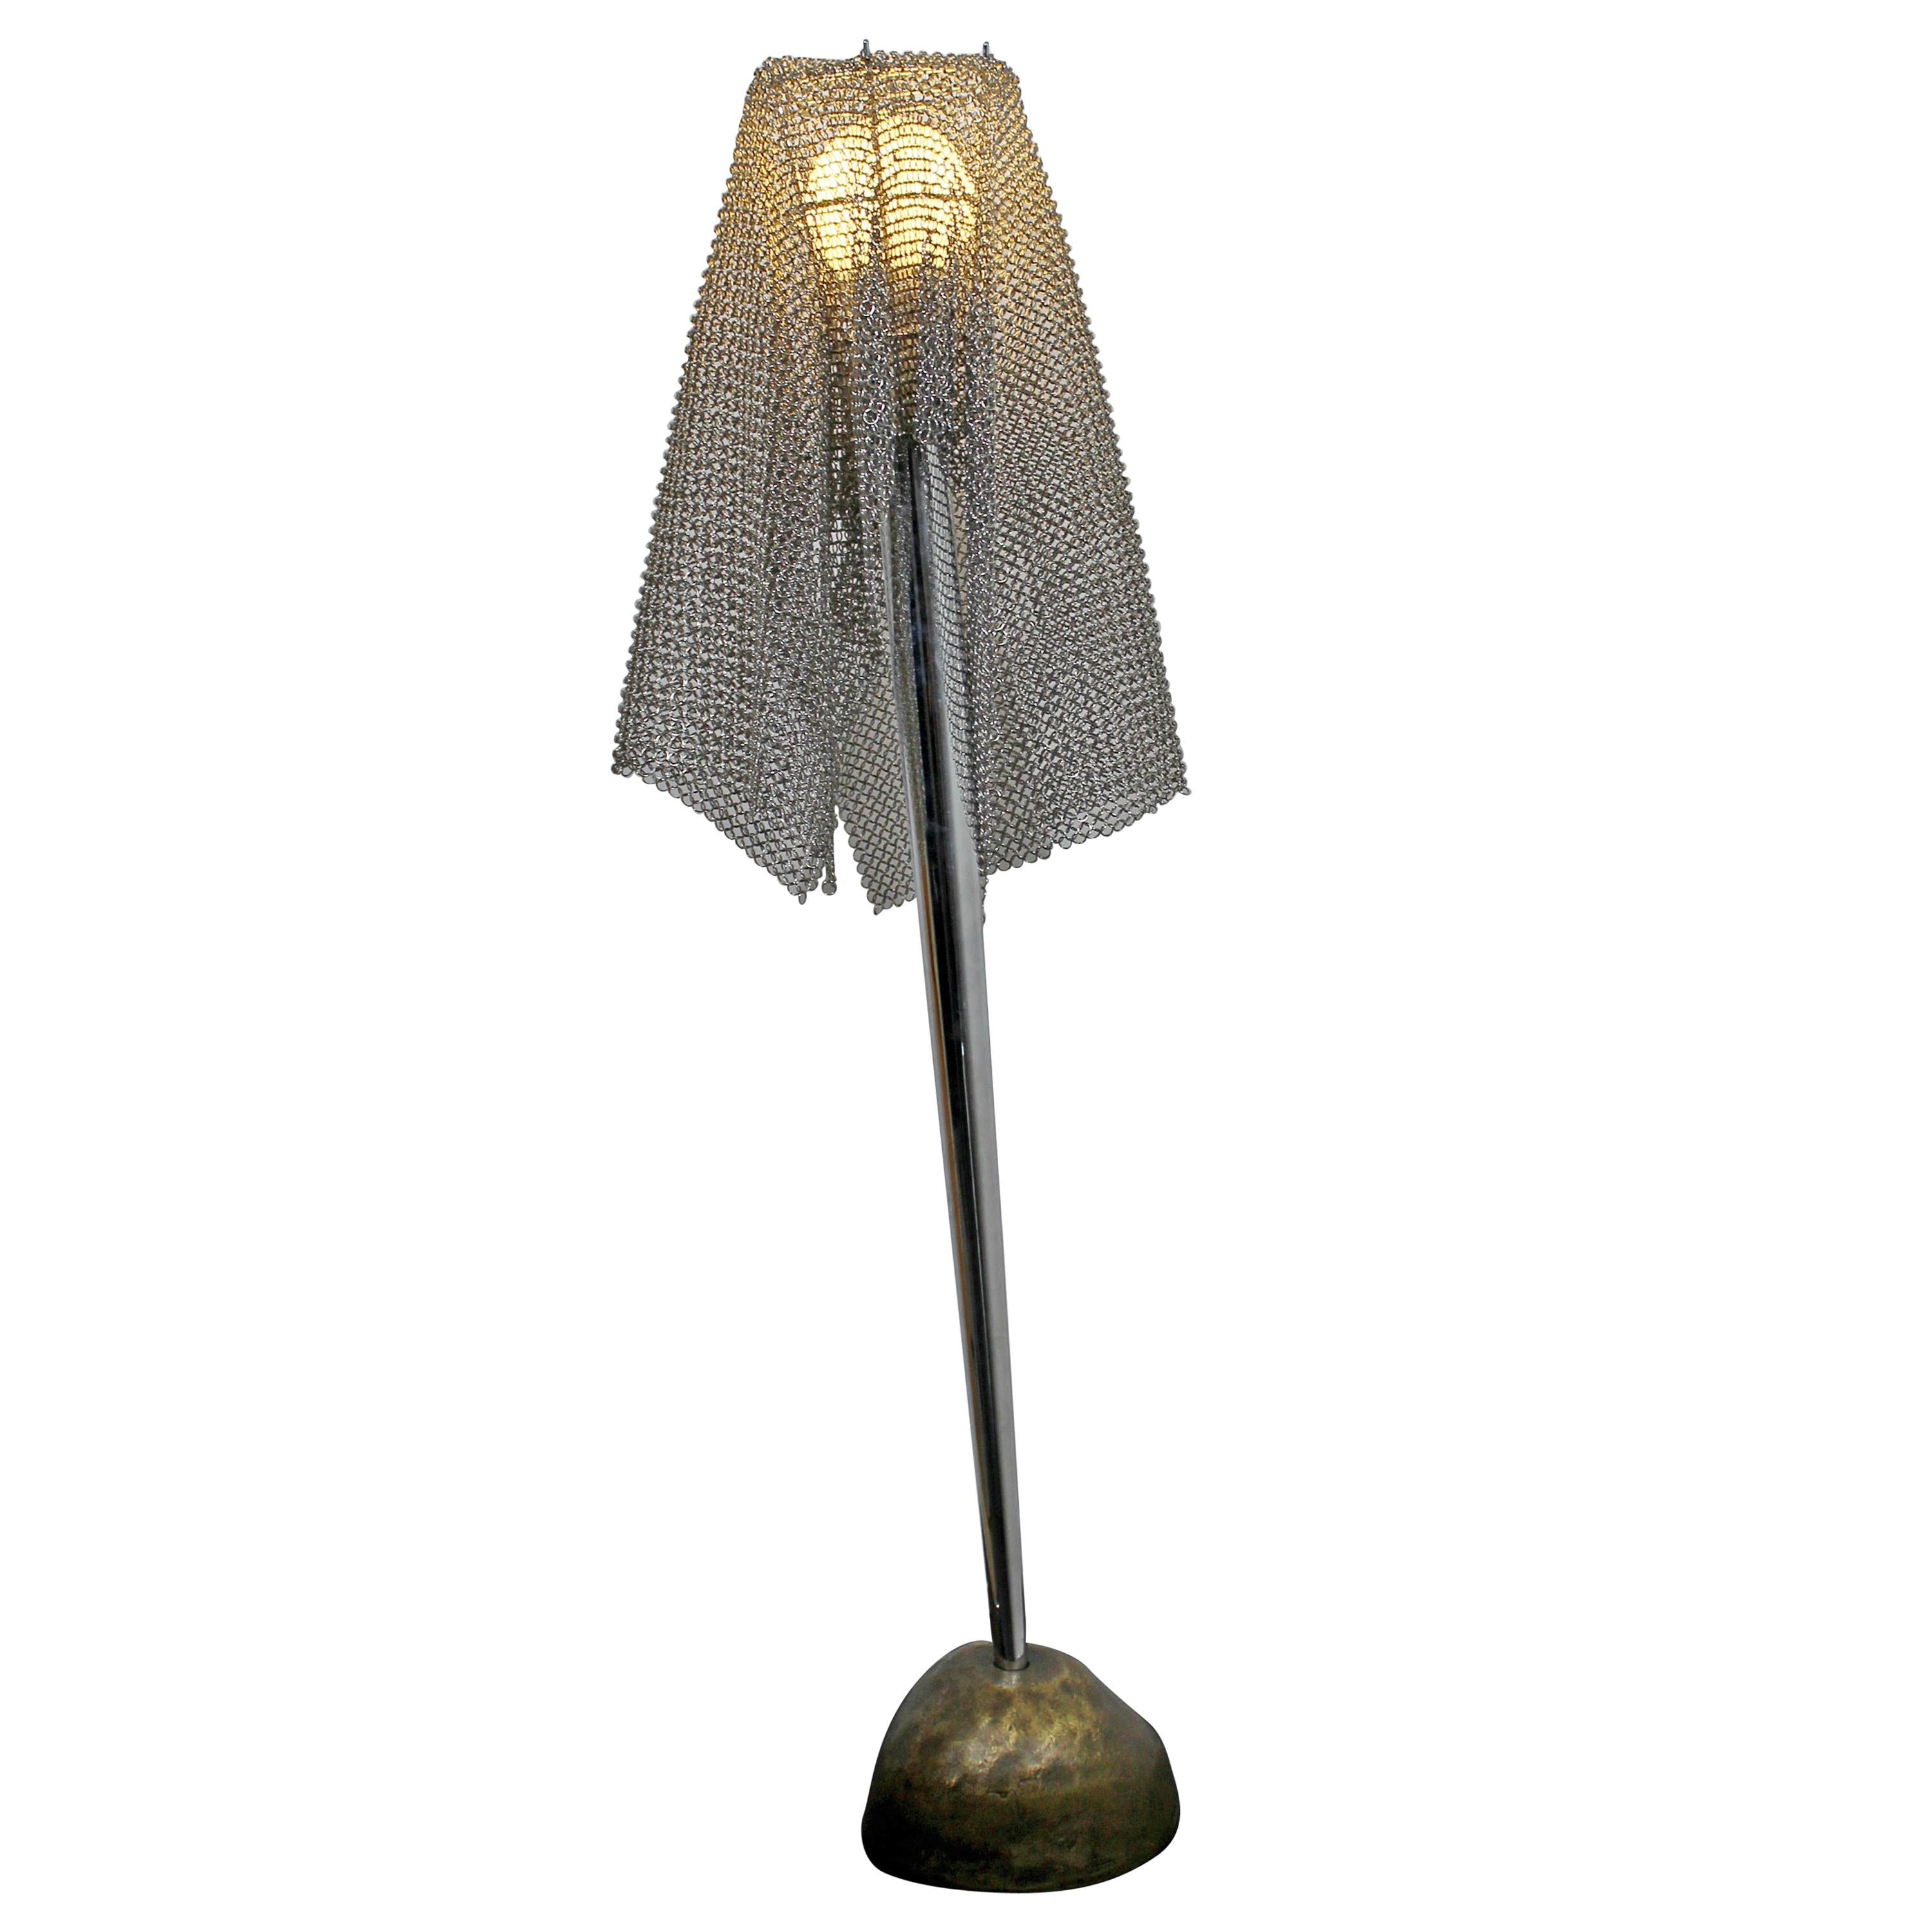 Contemporary Anchise Chain Mail Table Lamp Toni Cordero for Artemide Italy 1990s